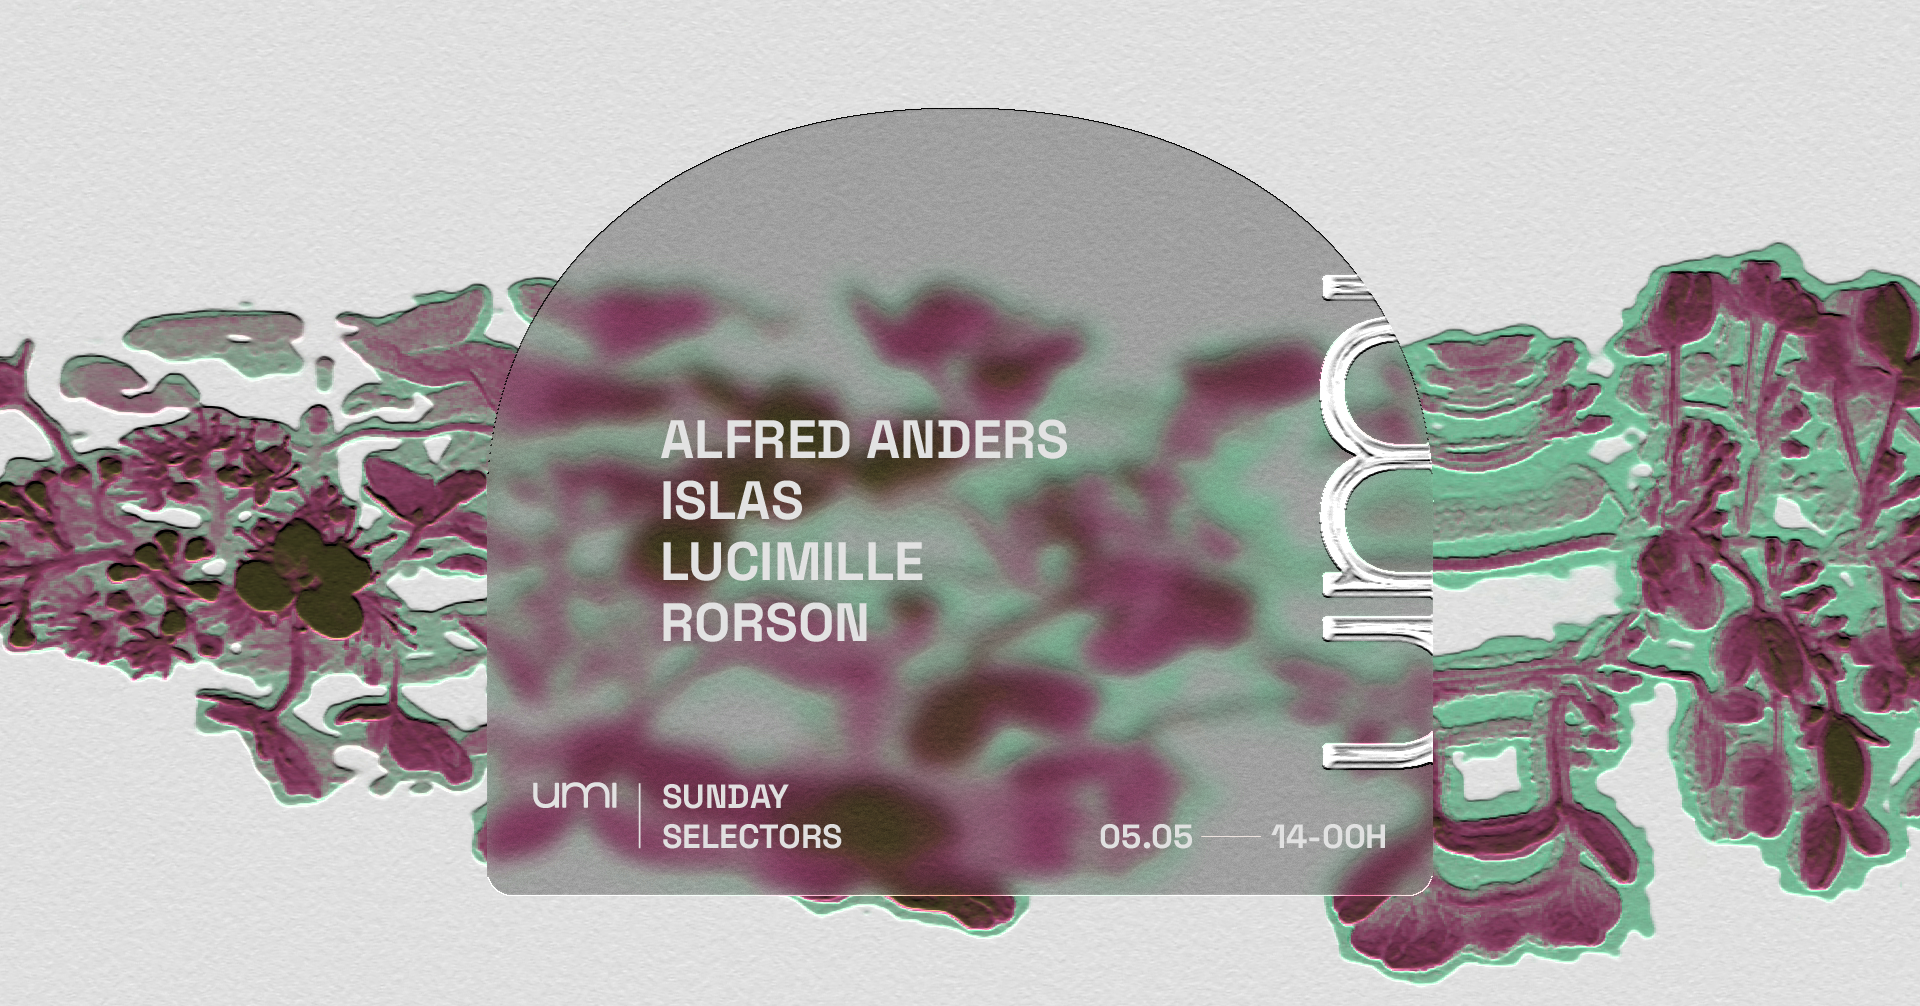 UMI SUNDAY SELECTORS with Alfred Anders, Islas, Lucimille, Rorson - フライヤー表